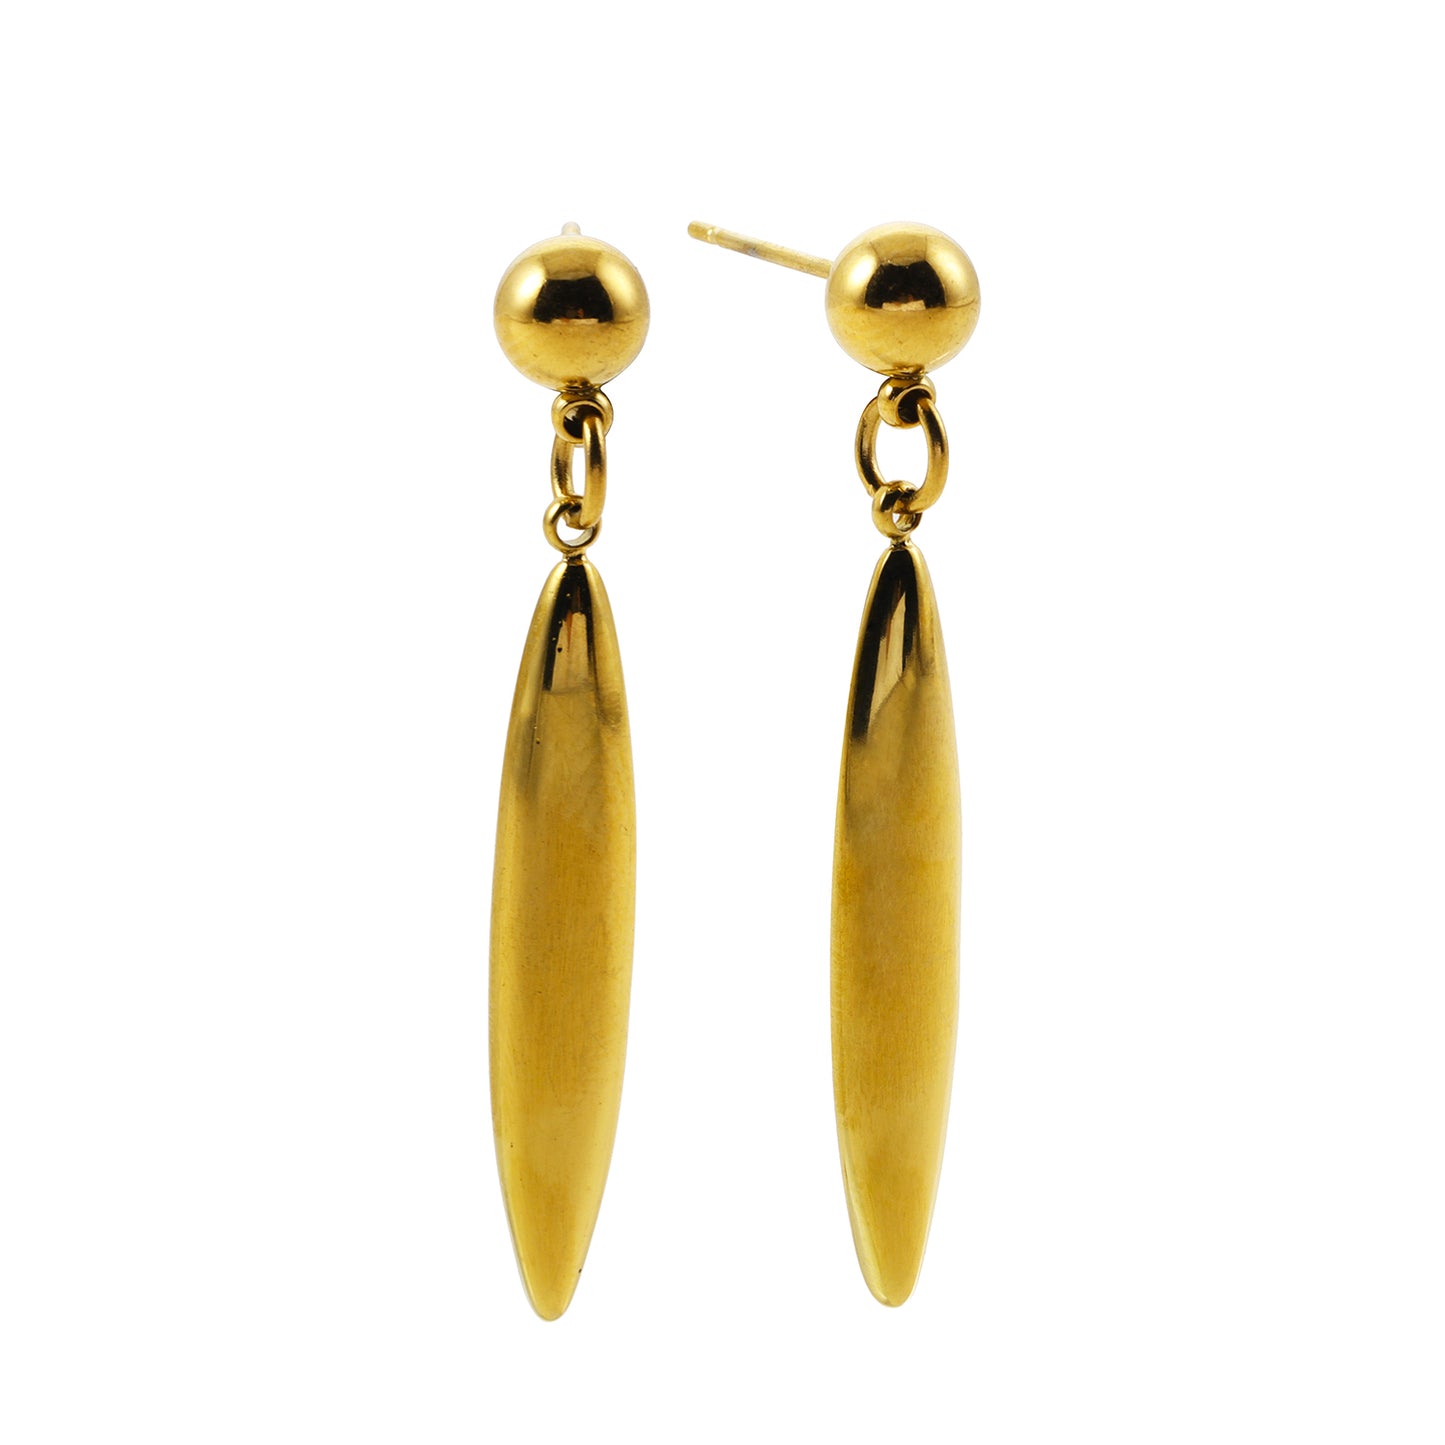 ARACELI: Vintage Inspired Dainty Oval Shaped Earrings Anchored by Rounded Beads